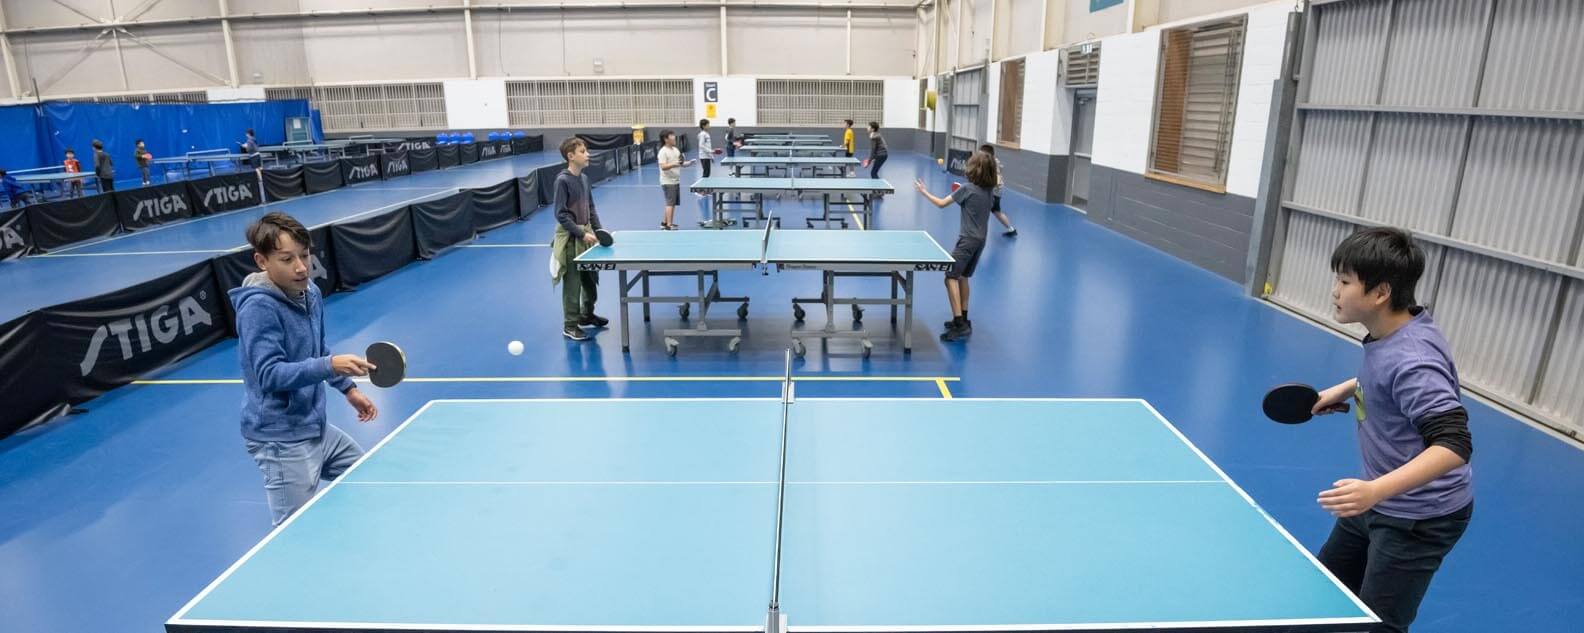 Table tennis match at Sports Halls